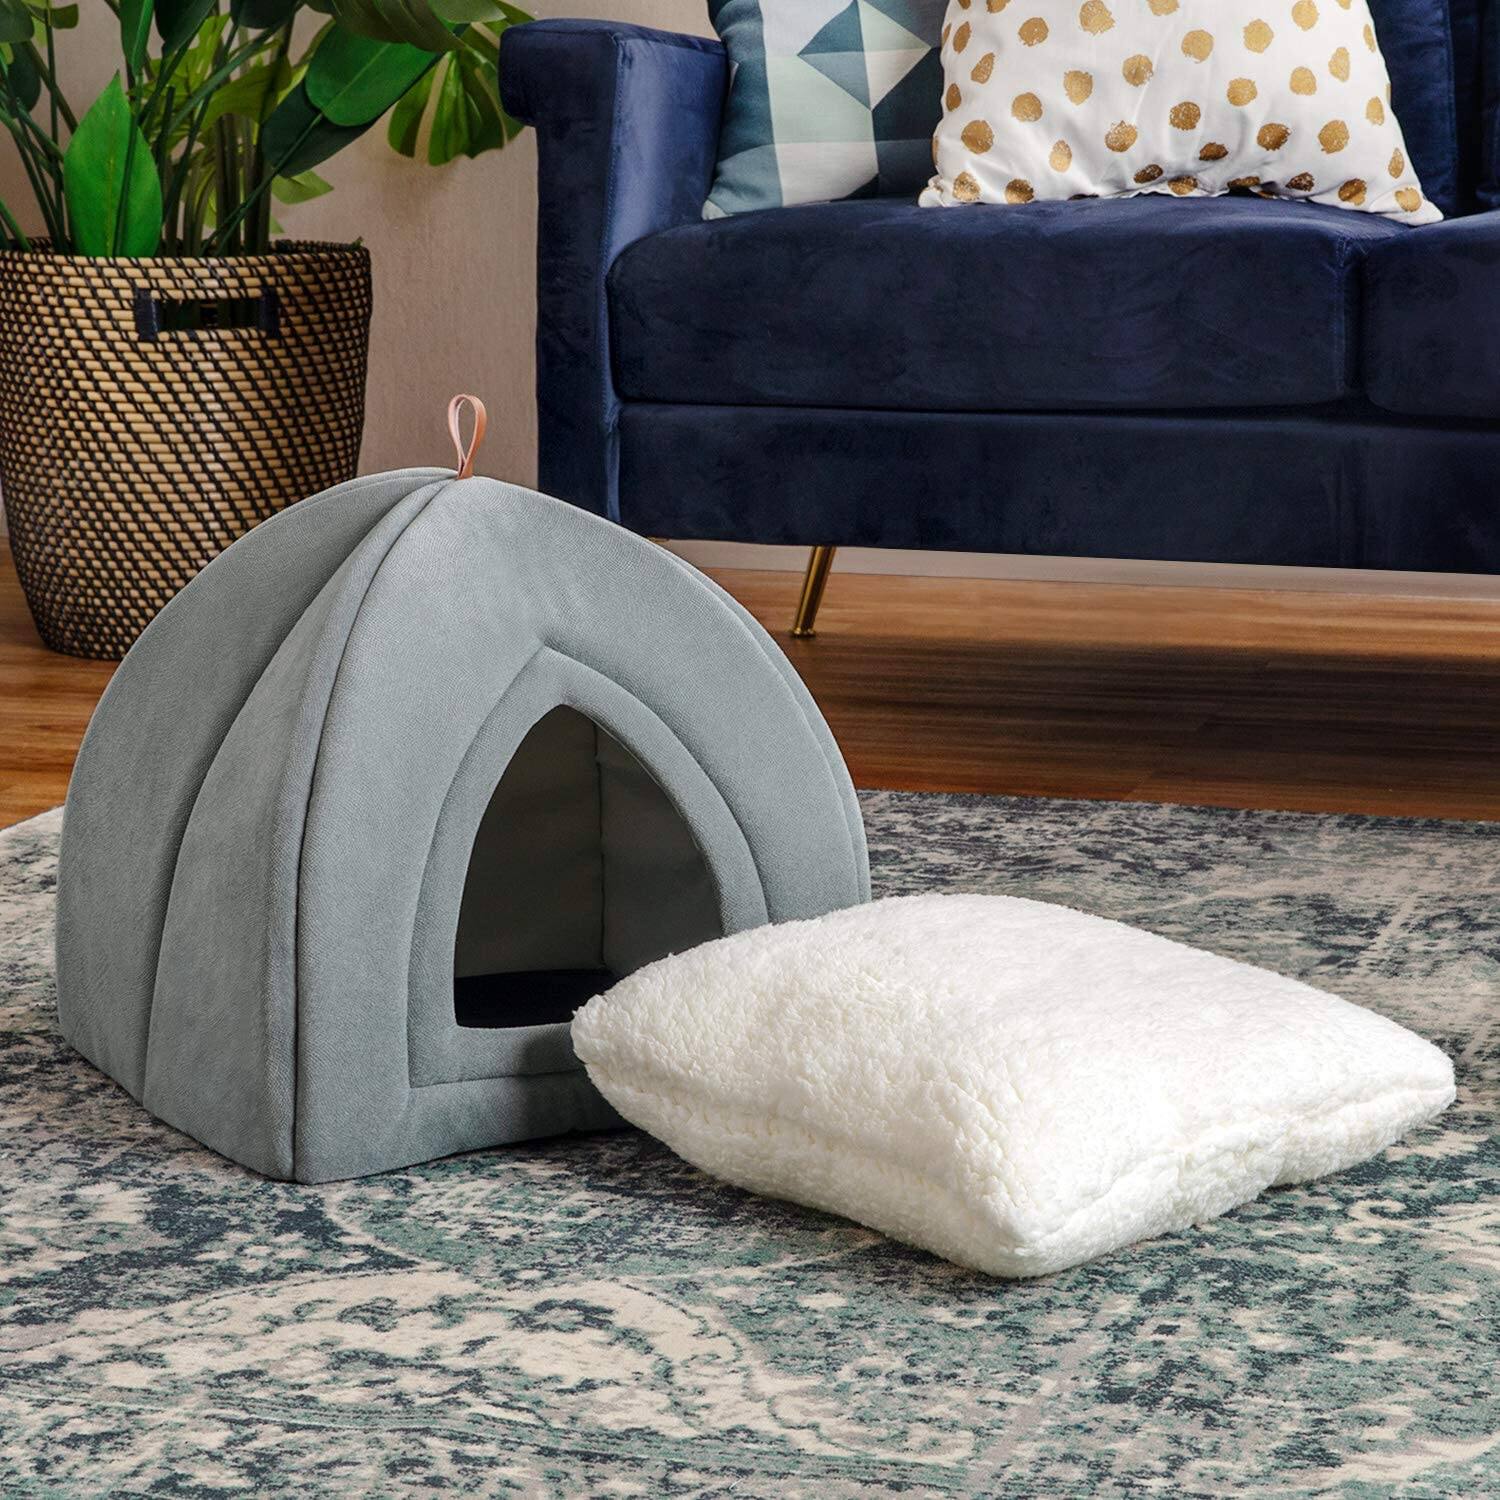 Bedsure Dog Tent Beds (3 colors) $11.19~$16.39 + Free Shipping with Prime $11.99